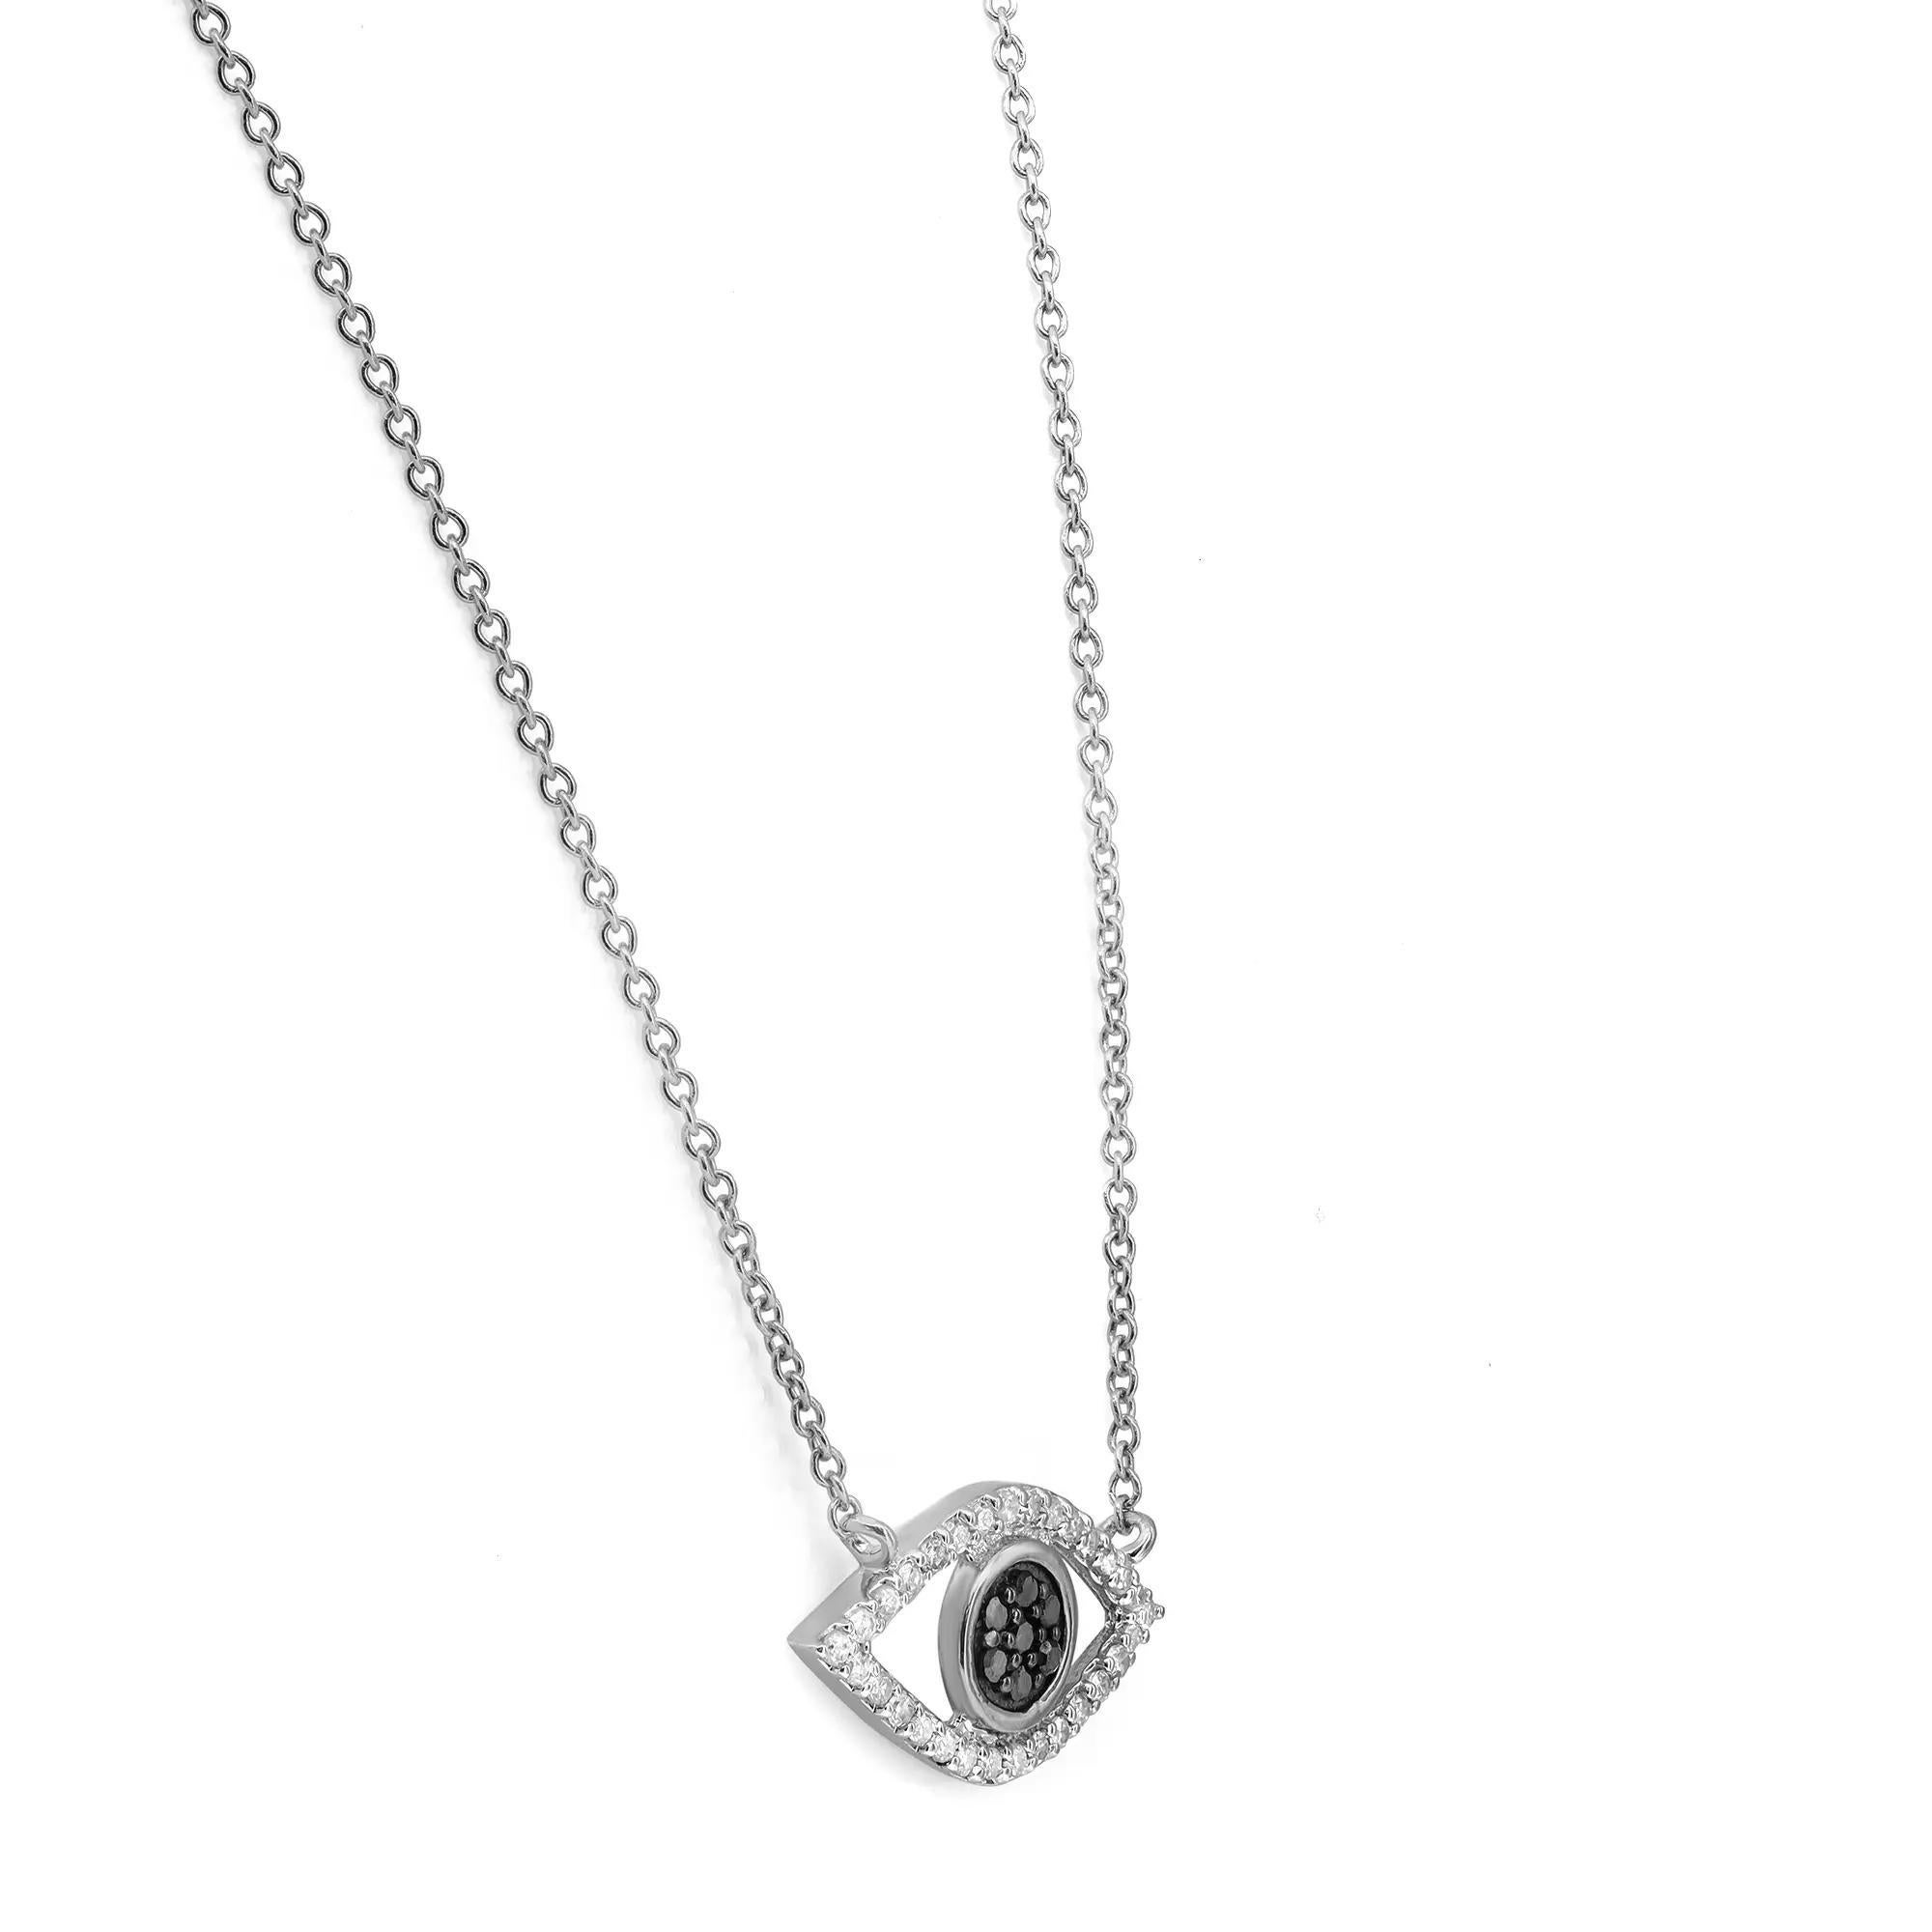 Modern Evil Eye Pave Diamond Pendant Necklace In 14K White Gold 0.18Cttw For Sale